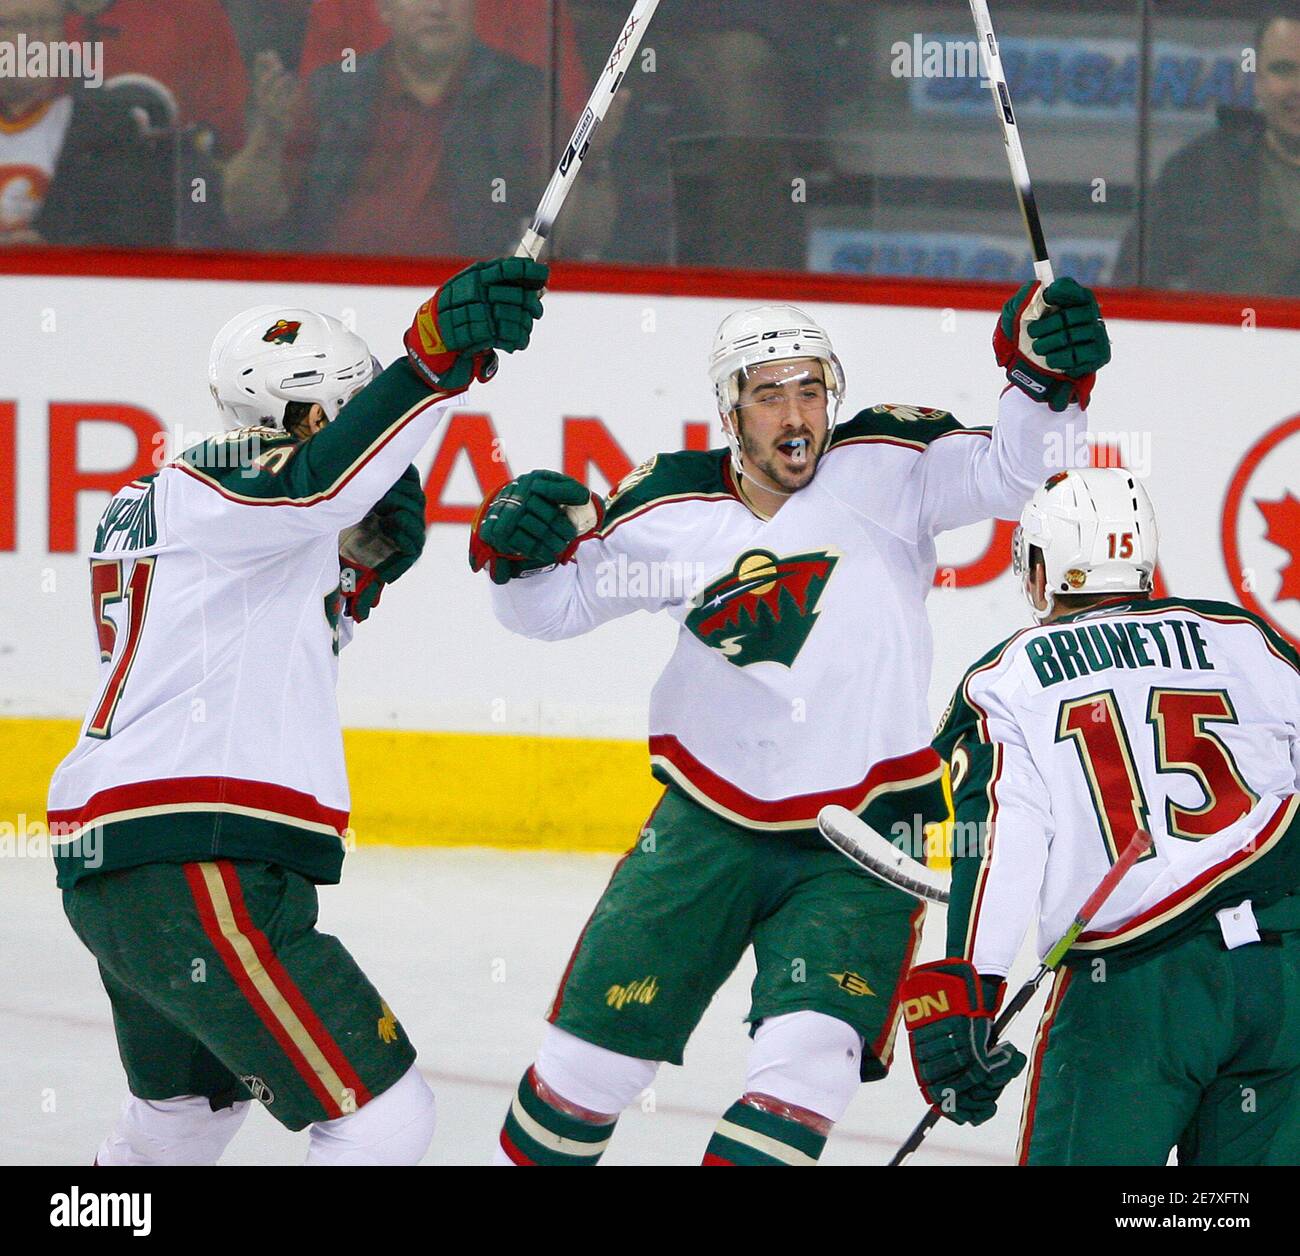 Minnesota Wild James Sheppard (L) and Cal Clutterbuck (C) celebrate teammate Andrew Brunette's goal during the first period of their NHL hockey game against the Calgary Flames in Calgary, Alberta March 28, 2009. REUTERS/Todd Korol (CANADA SPORT ICE HOCKEY) Stock Photo